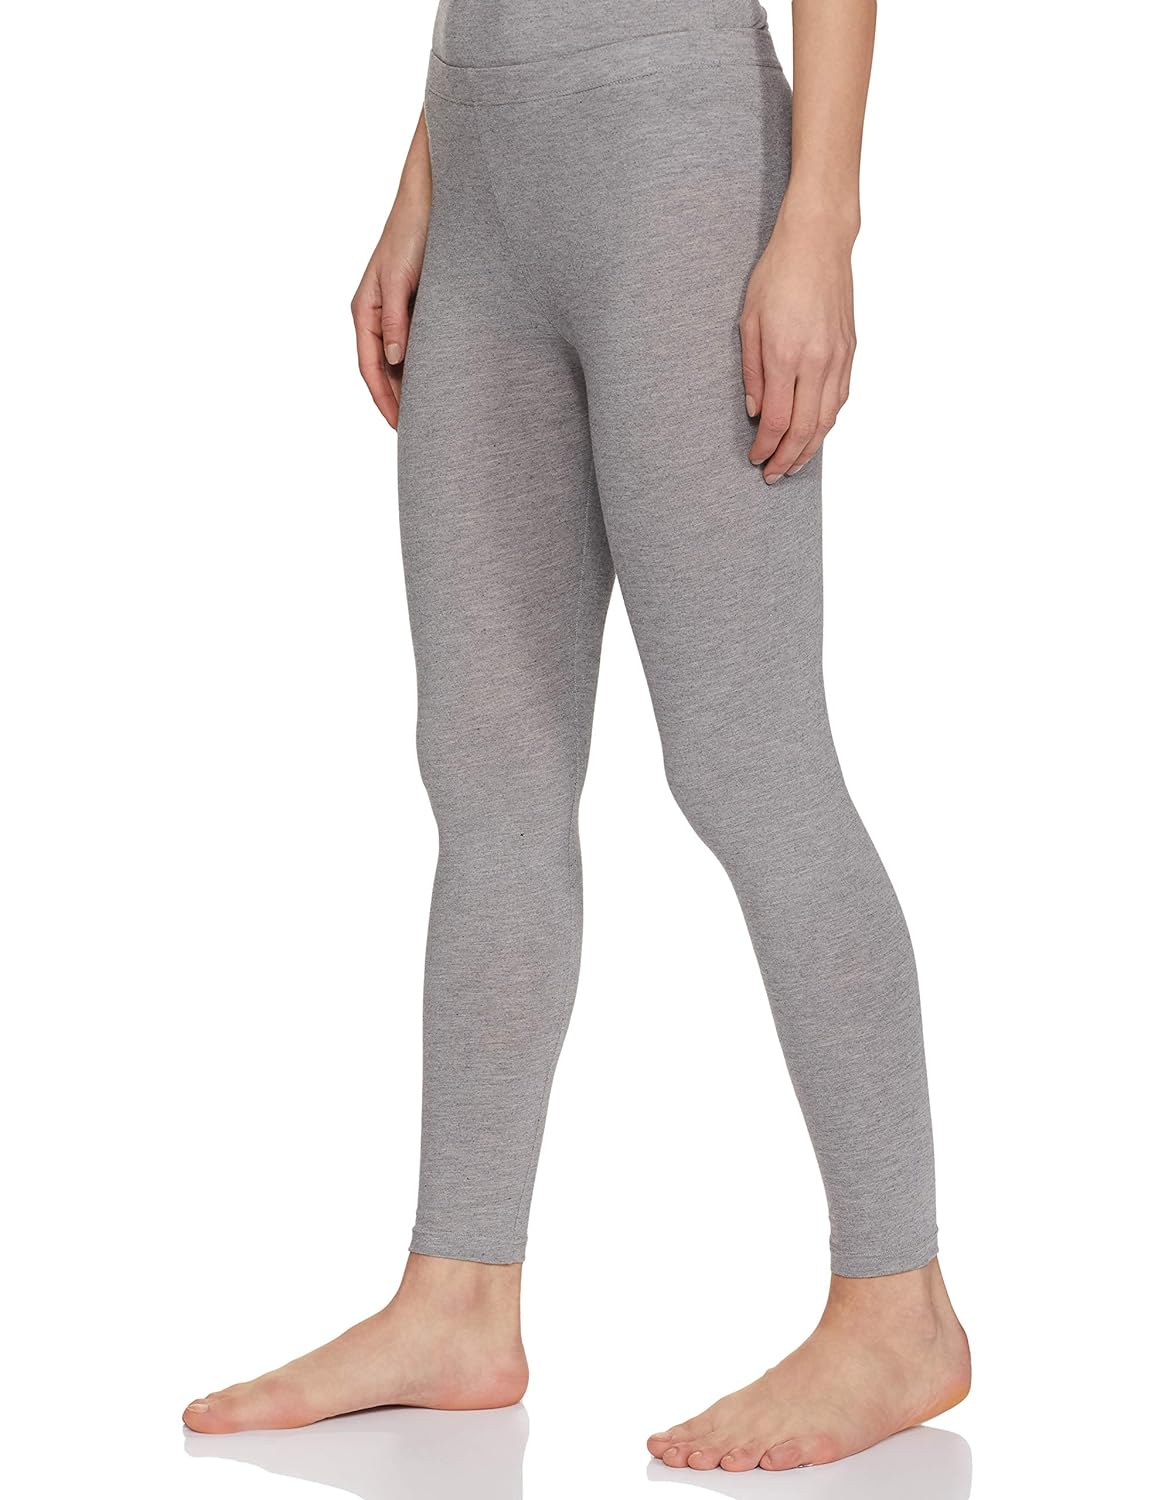 Jockey 2520 Women's Super Combed Cotton Rich Thermal Leggings with